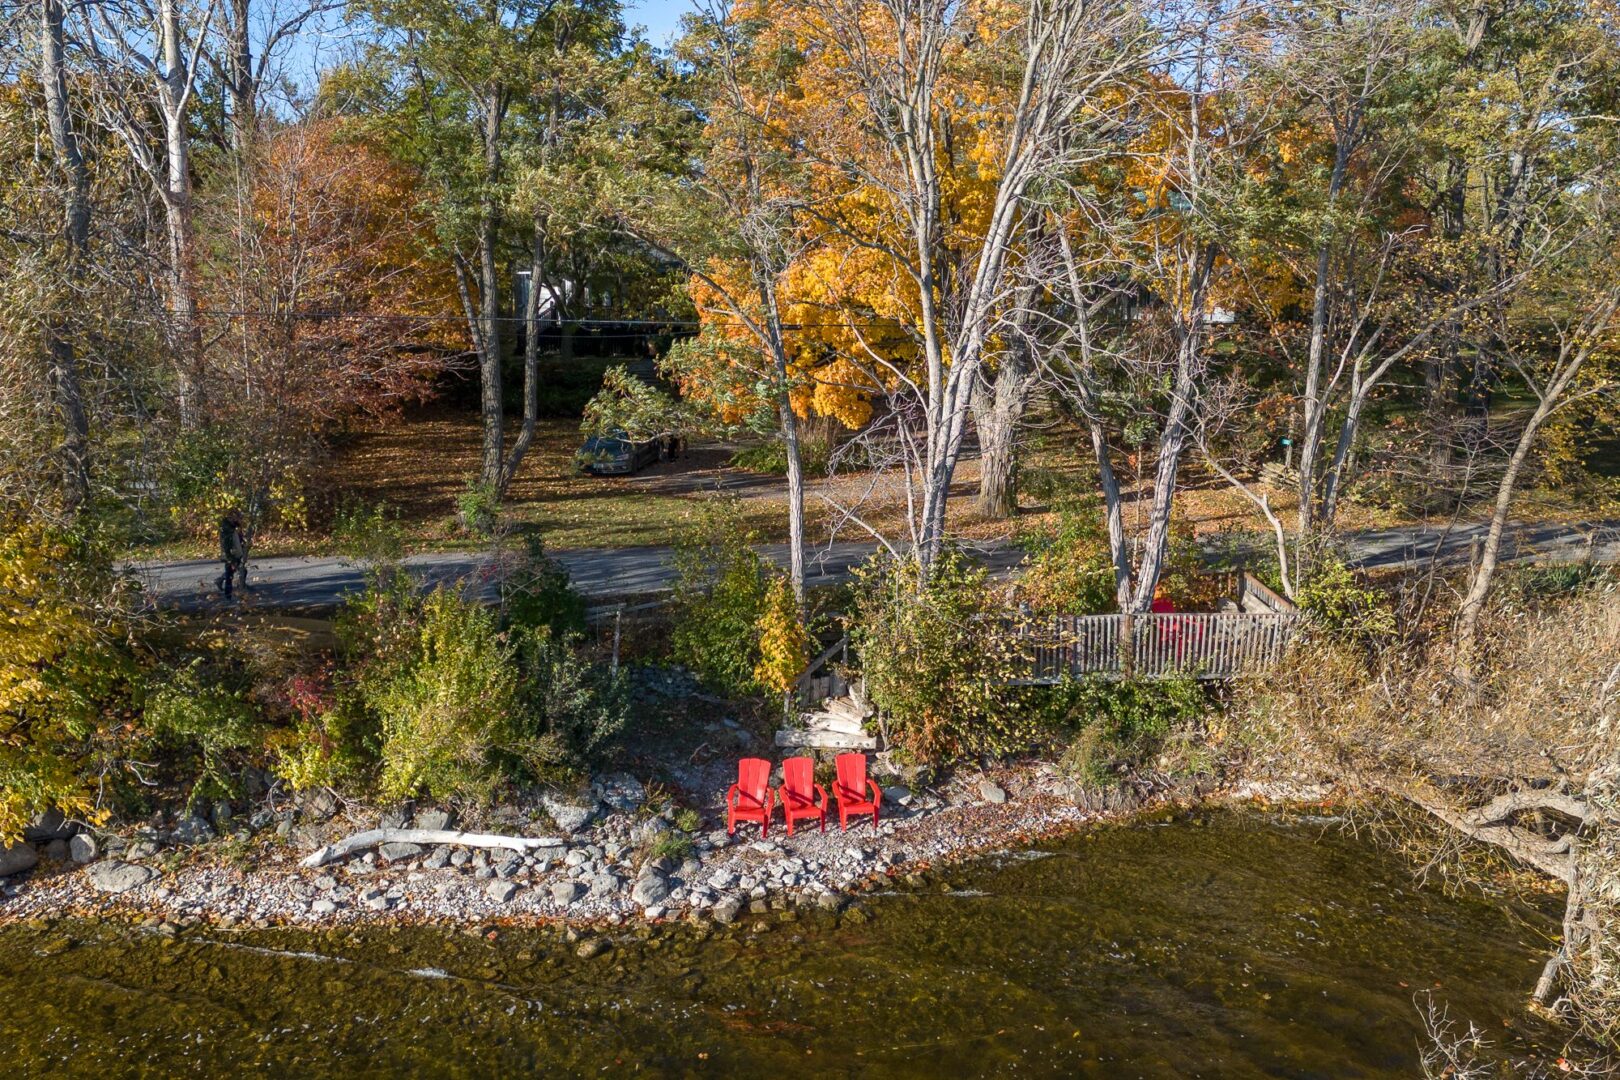 Two red Muskoka chairs sit on the rocky shore of a lake, just in front of a residential road.